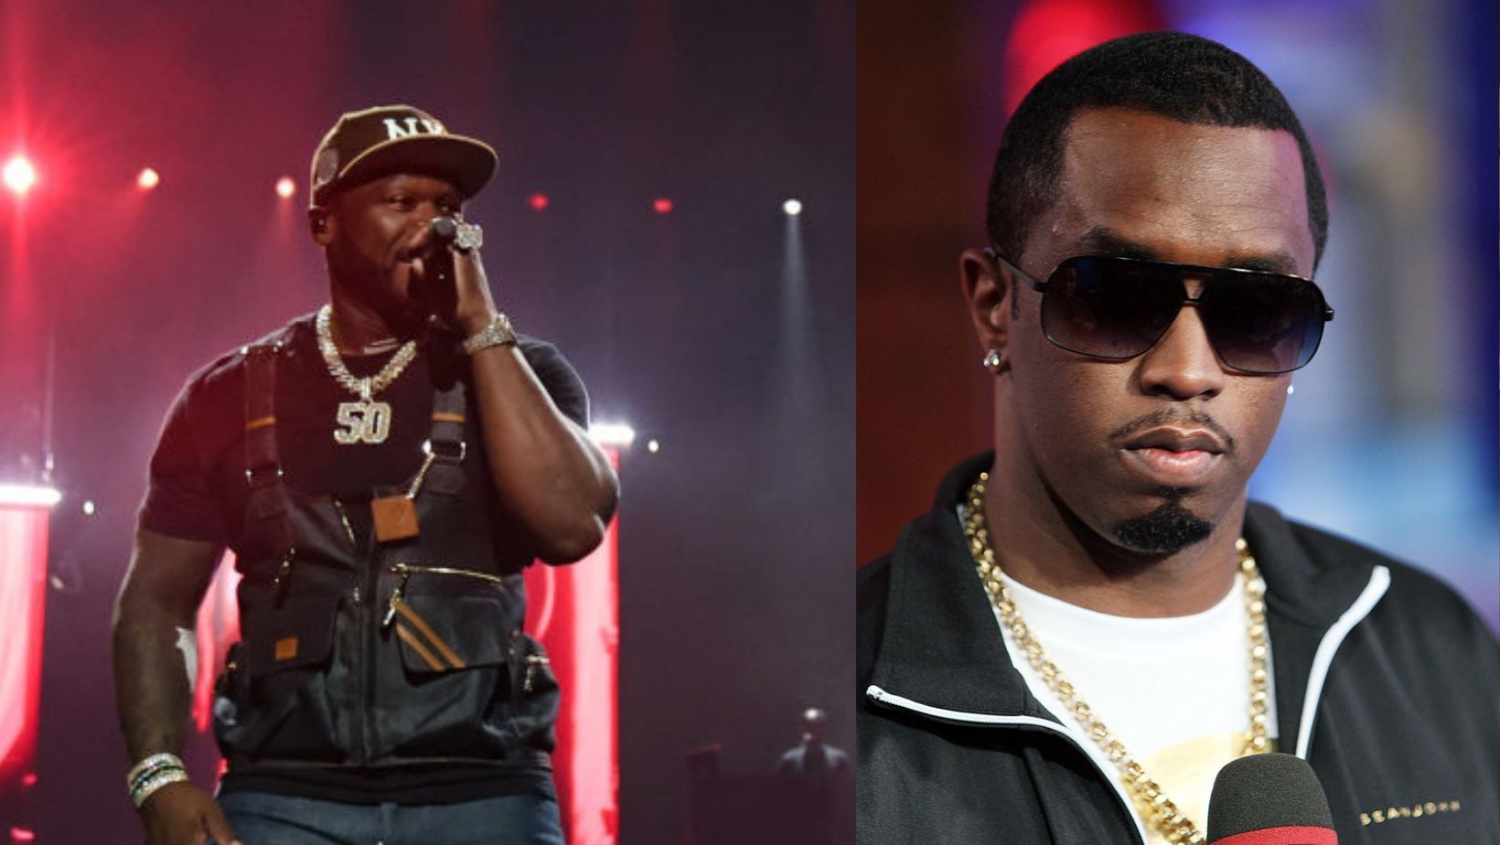 50 Cent Celebrating Amid Sean 'Diddy' Combs' Downfall? Rappers' Decades-Long Feud Explored 